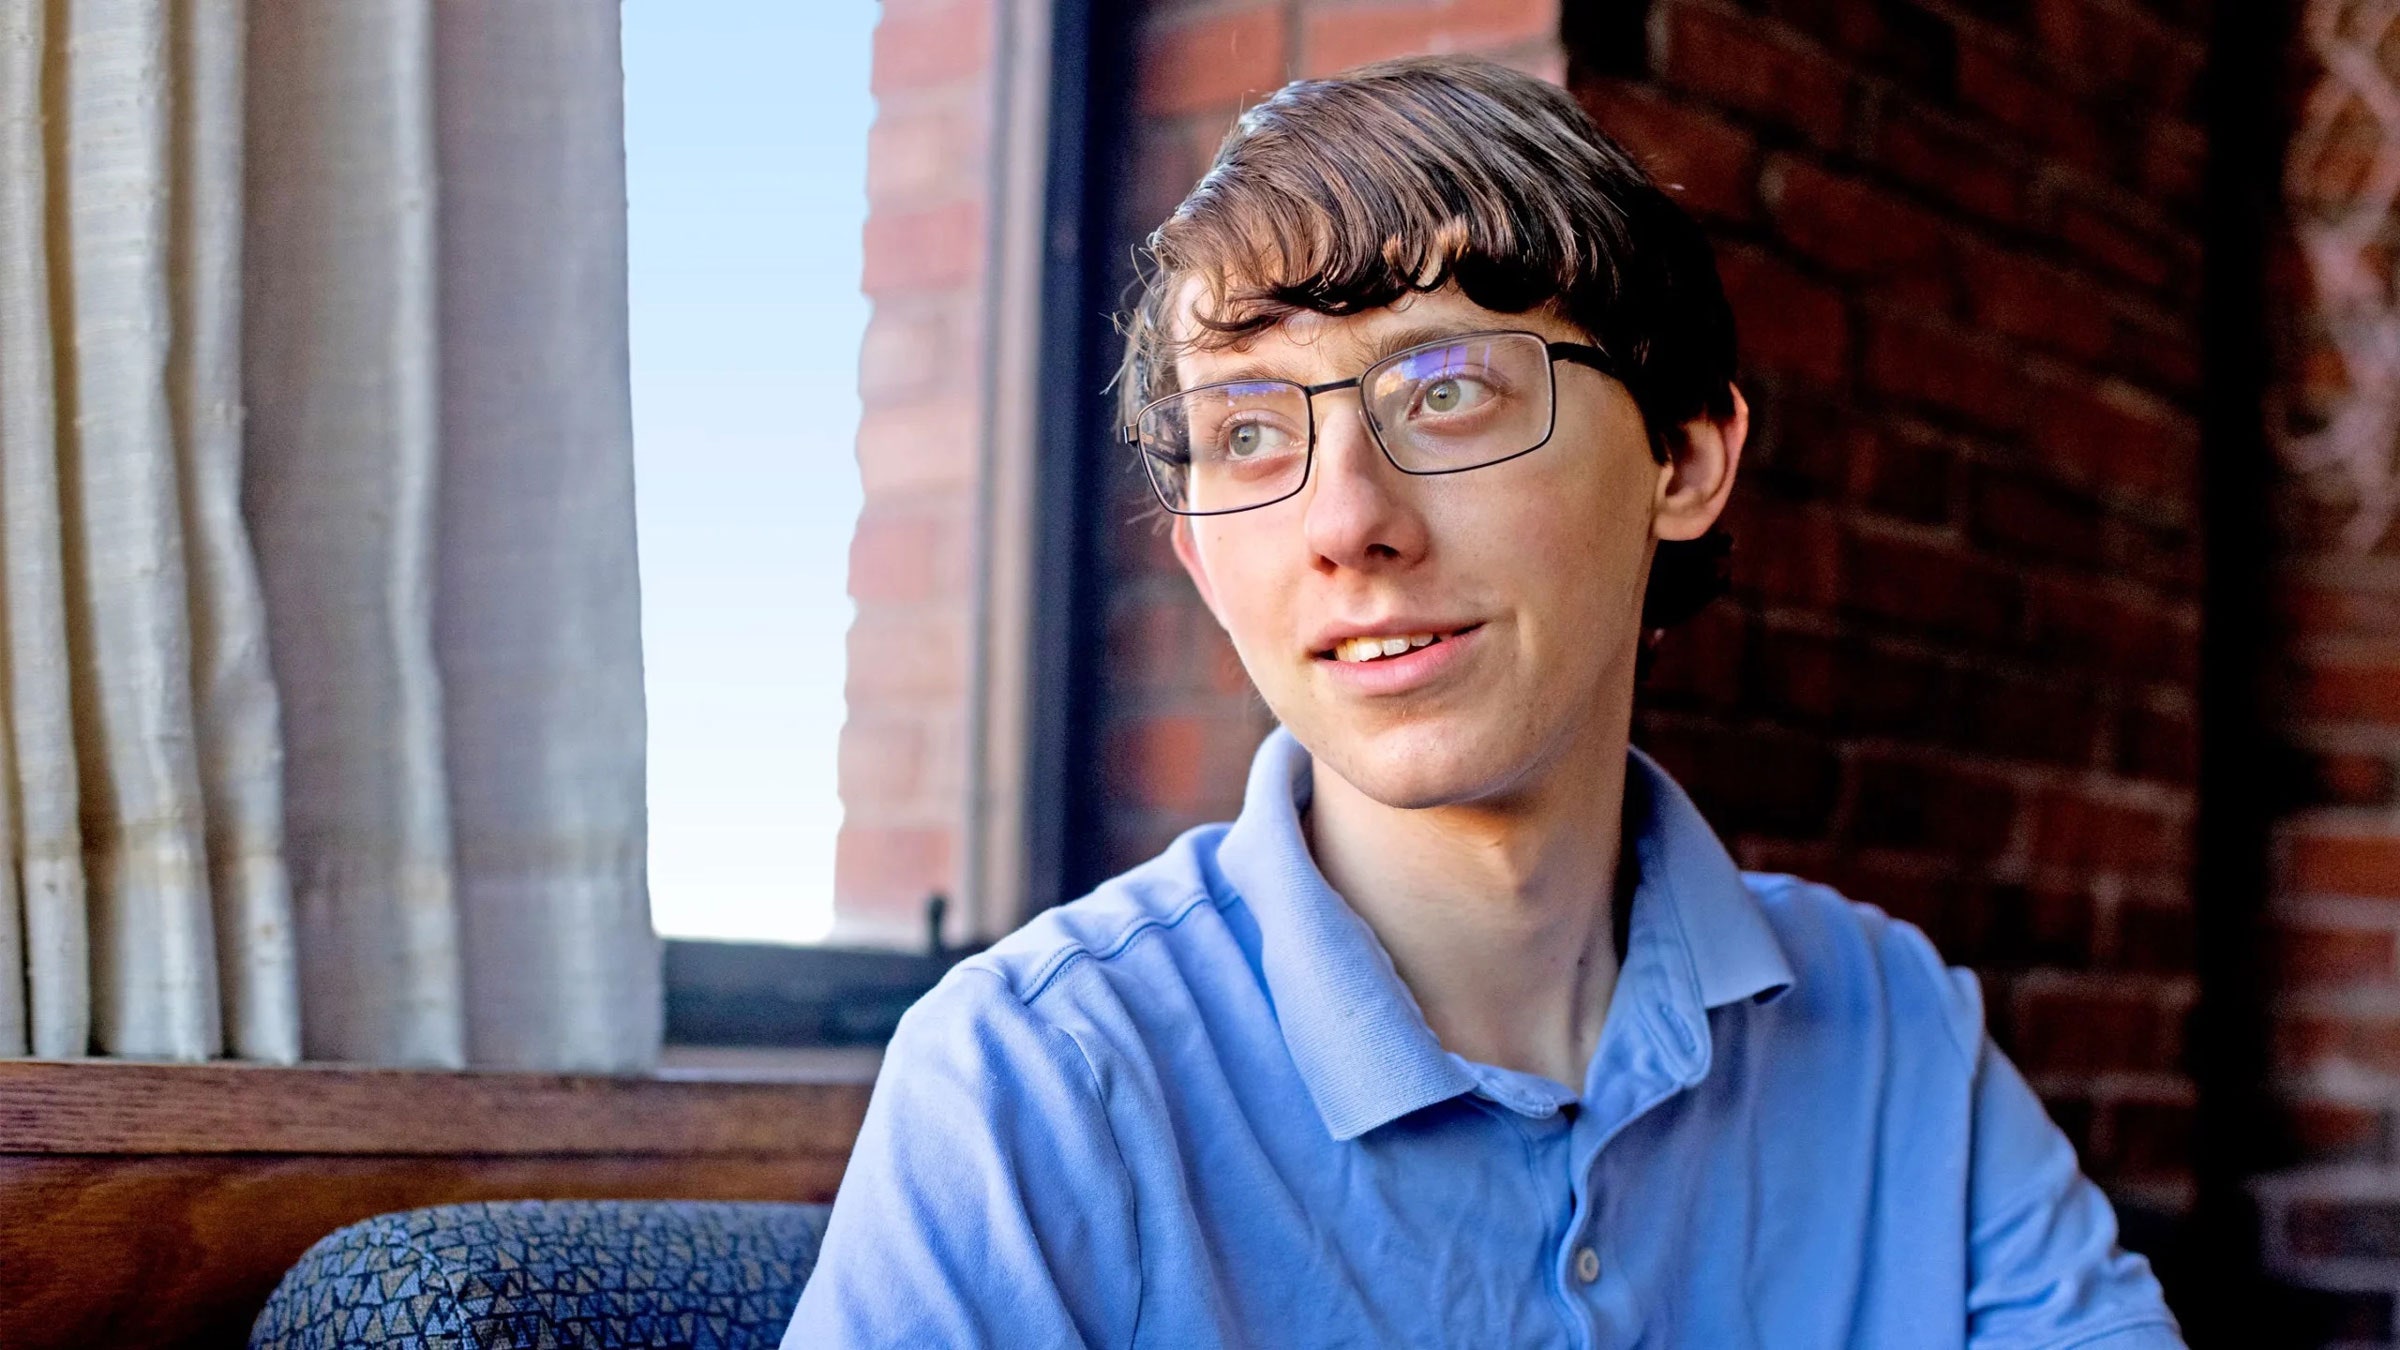 Max Wright Porn - A Teenager Solved a Stubborn Prime Number 'Look-Alike' Riddle | WIRED